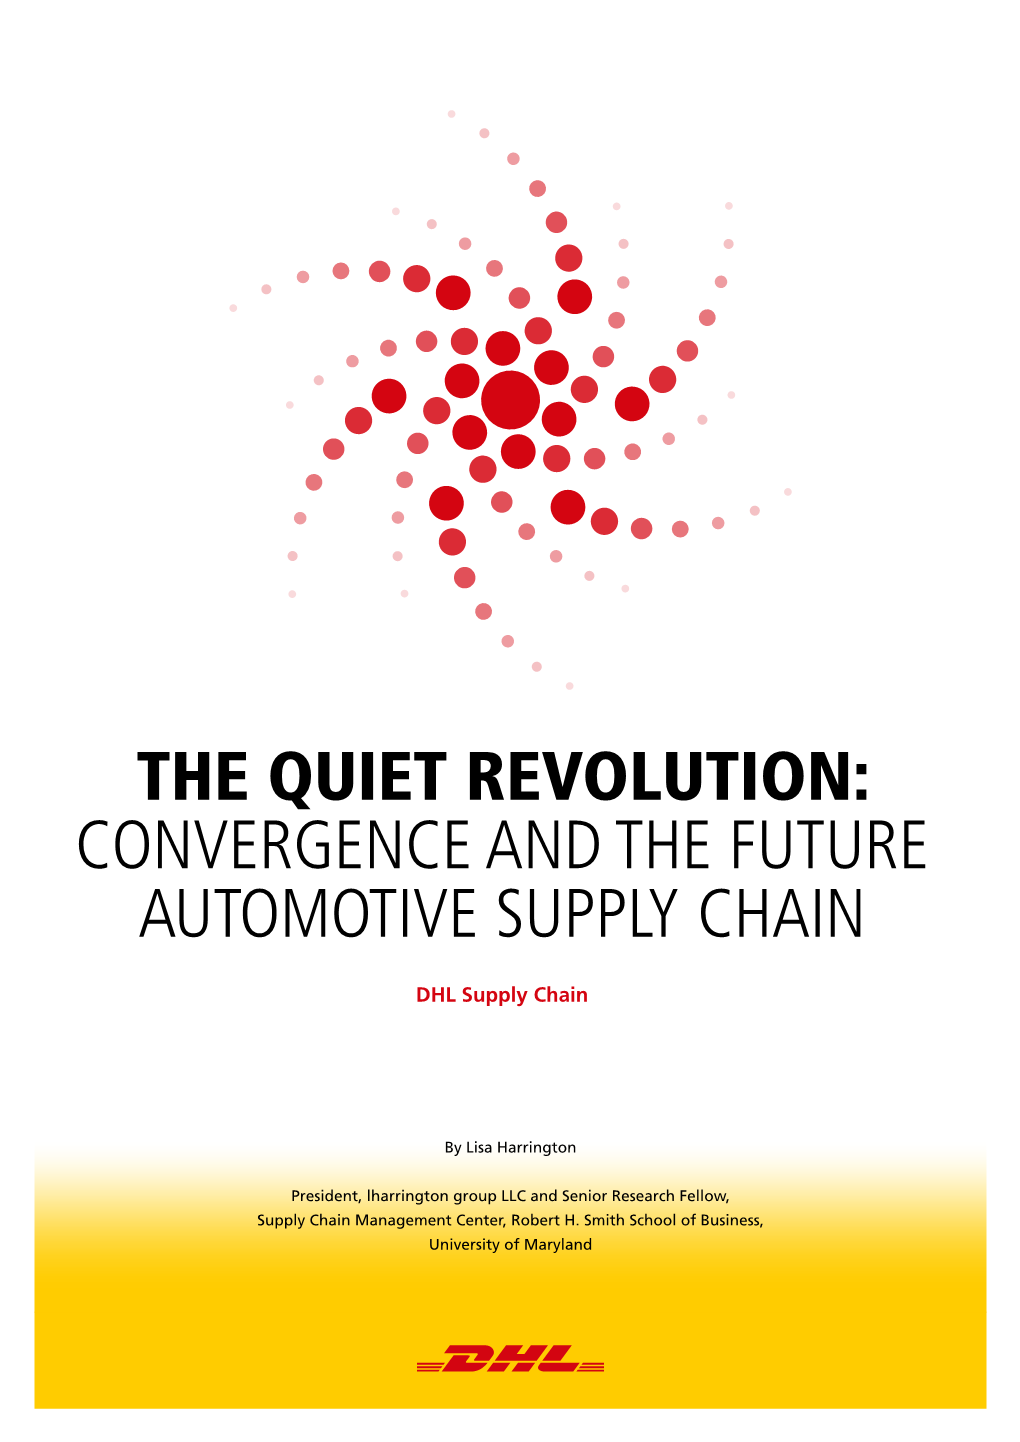 Convergence and the Future Automotive Supply Chain